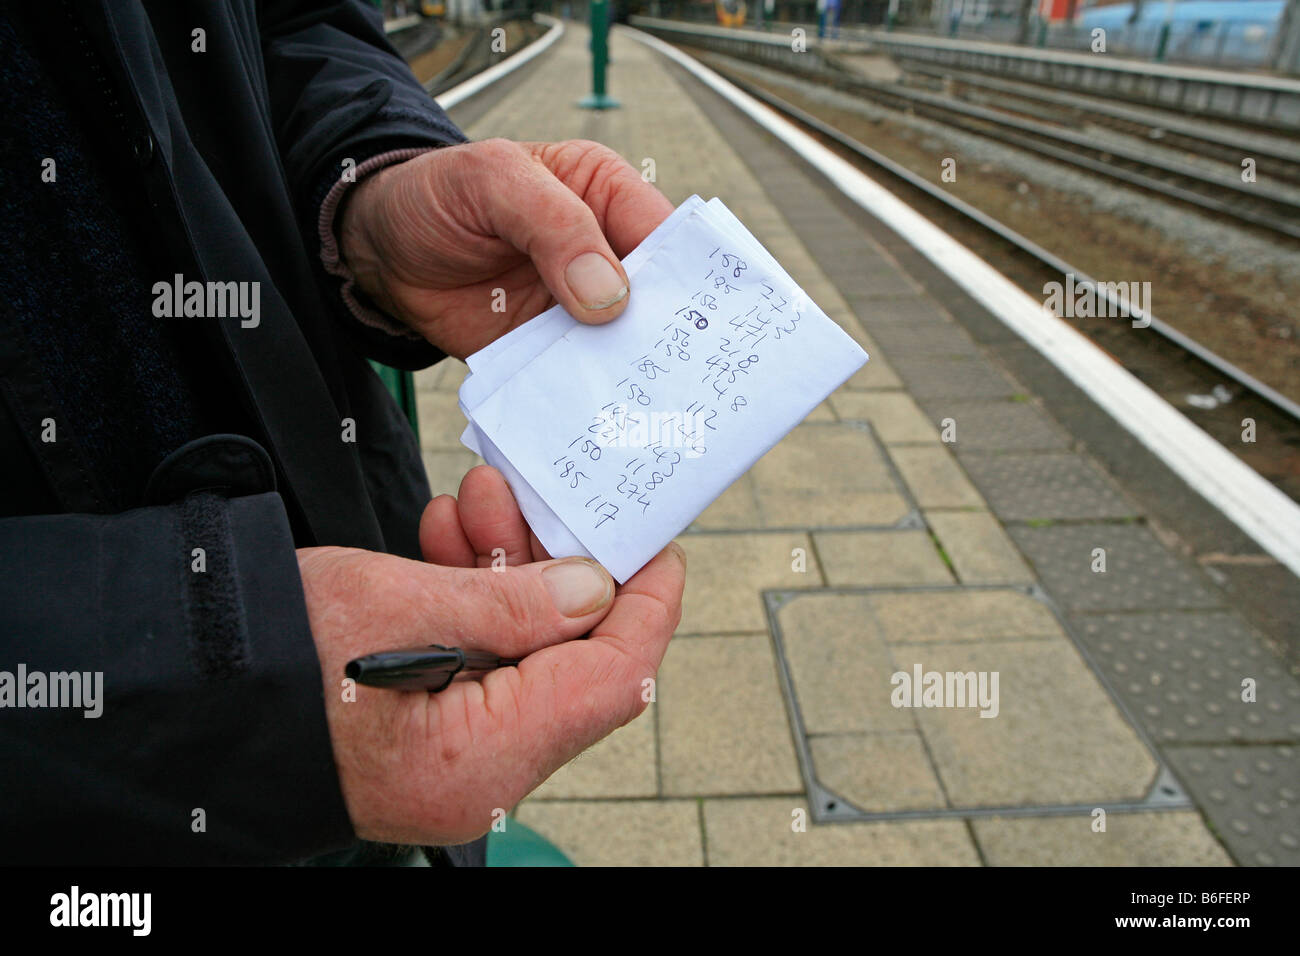 A trainspotter's notes at Manchester Piccadilly train station Stock Photo